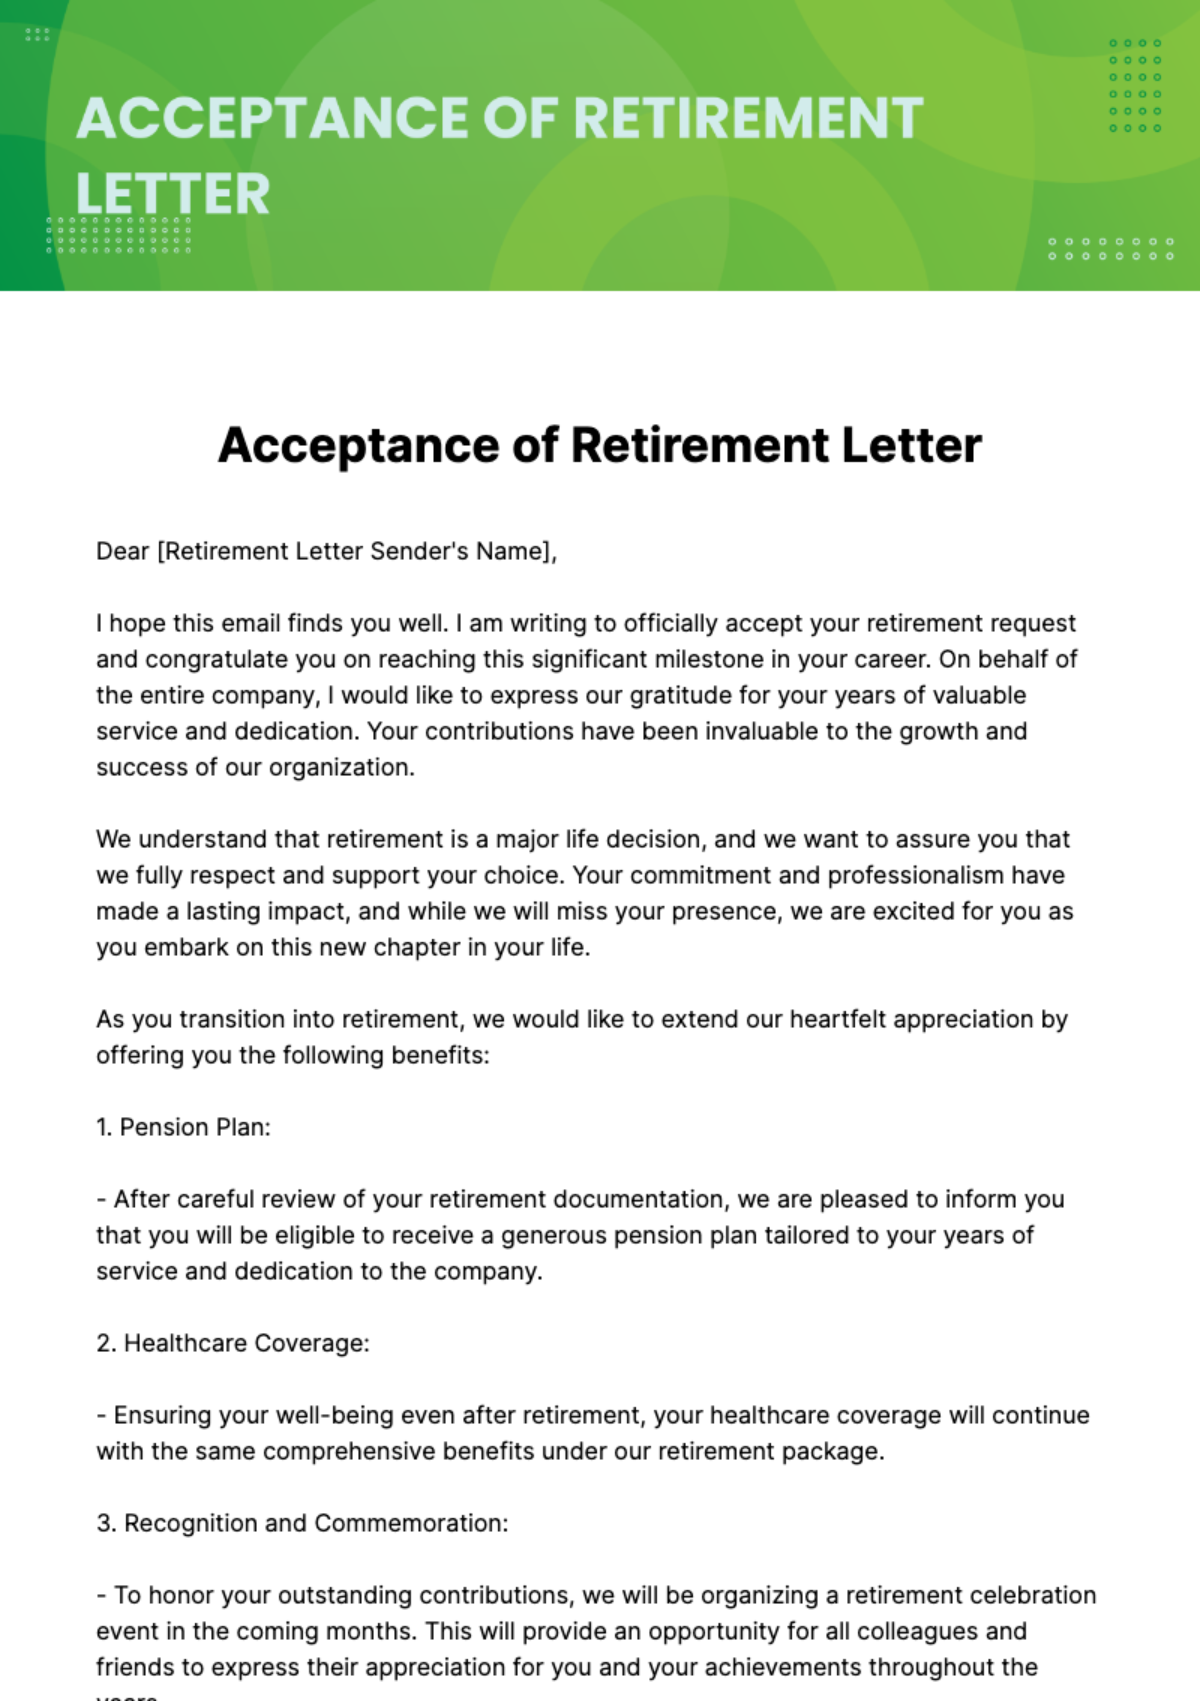 Free Acceptance Of Retirement Letter Template